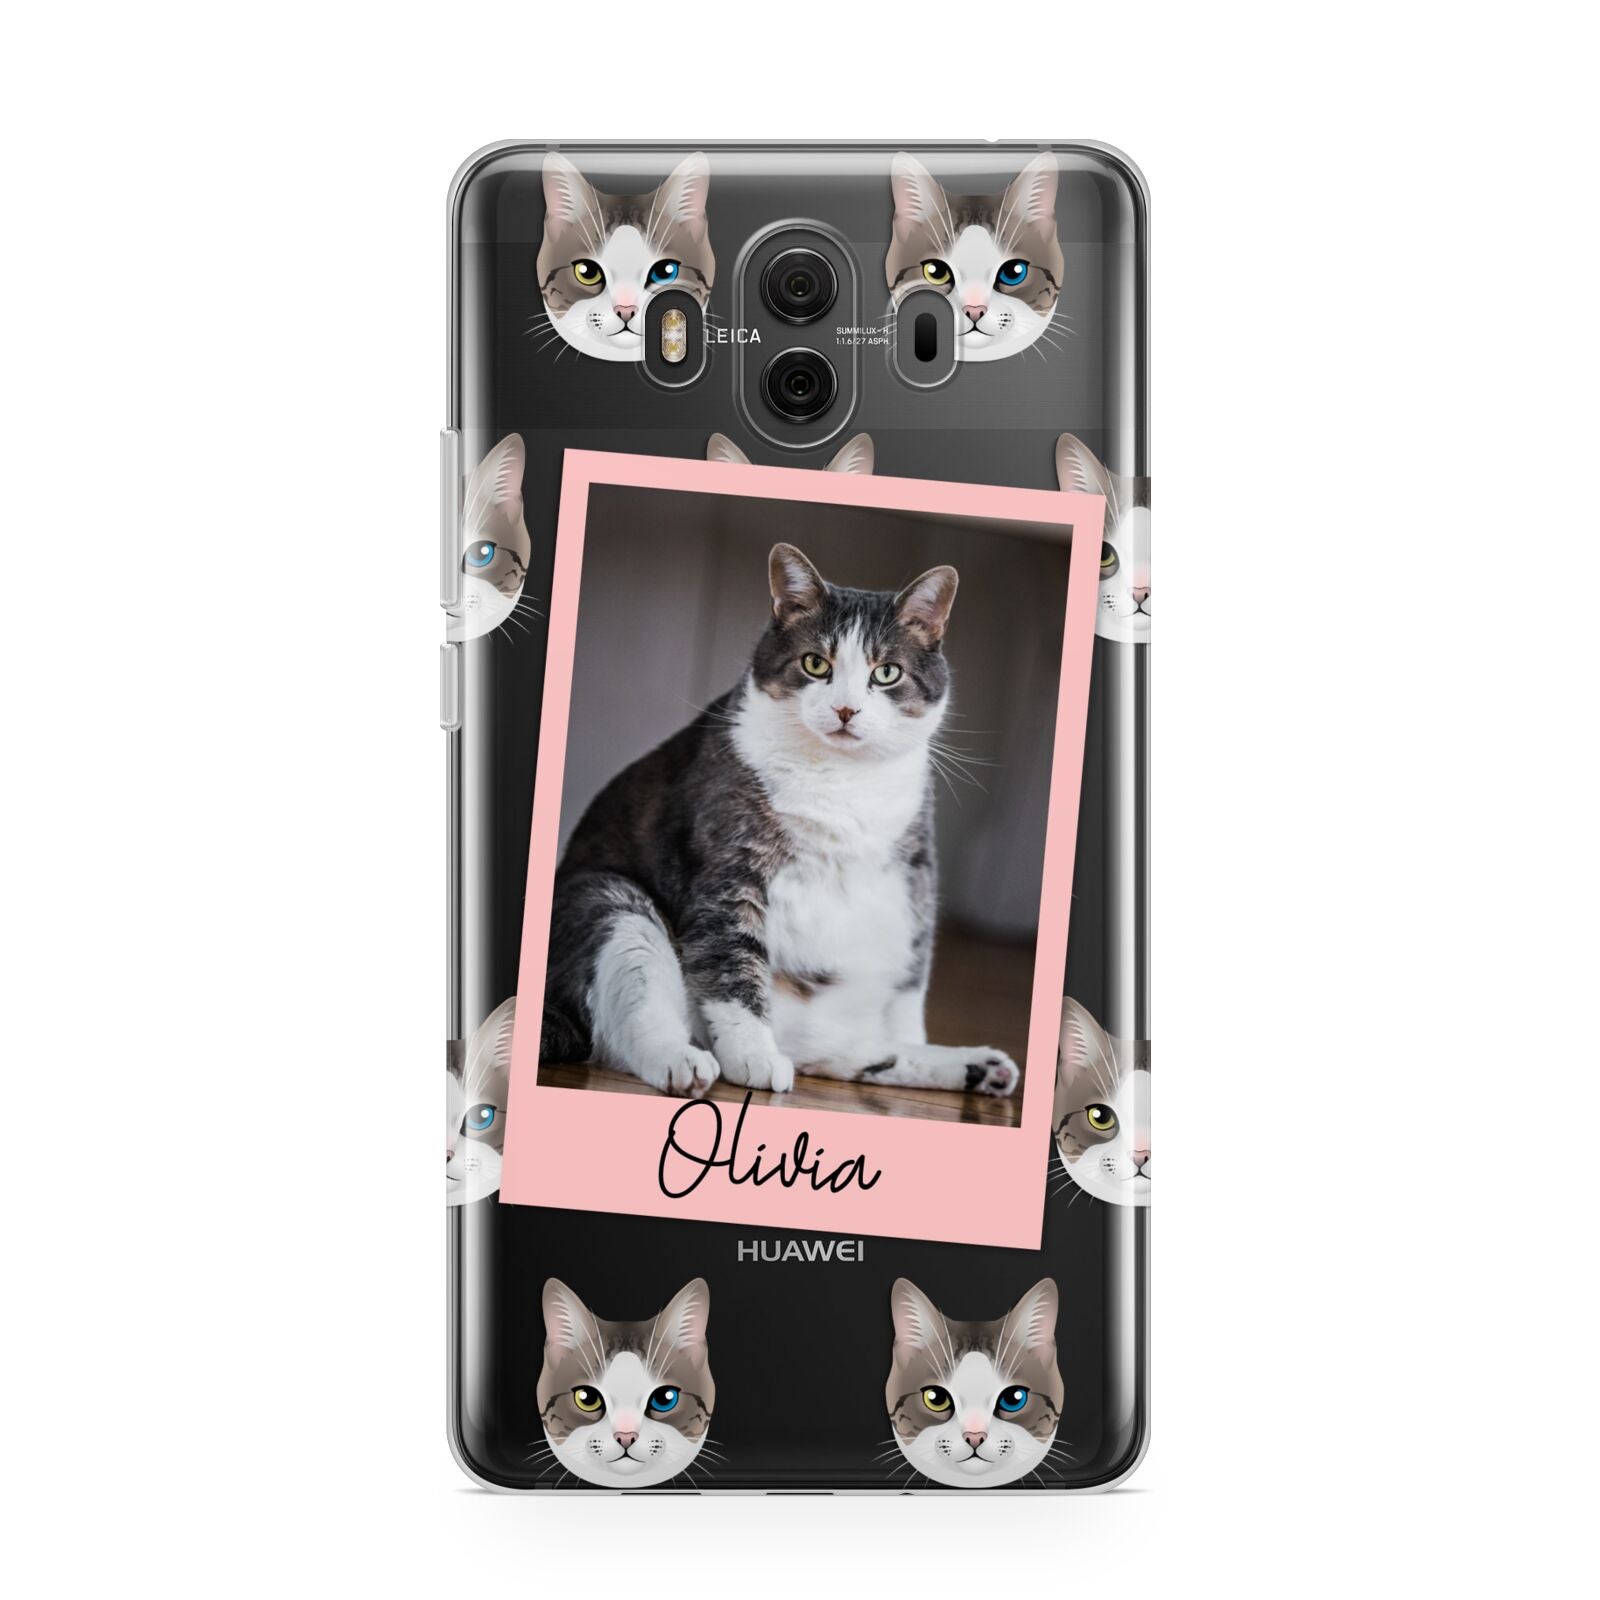 Personalised Cat Photo Huawei Mate 10 Protective Phone Case